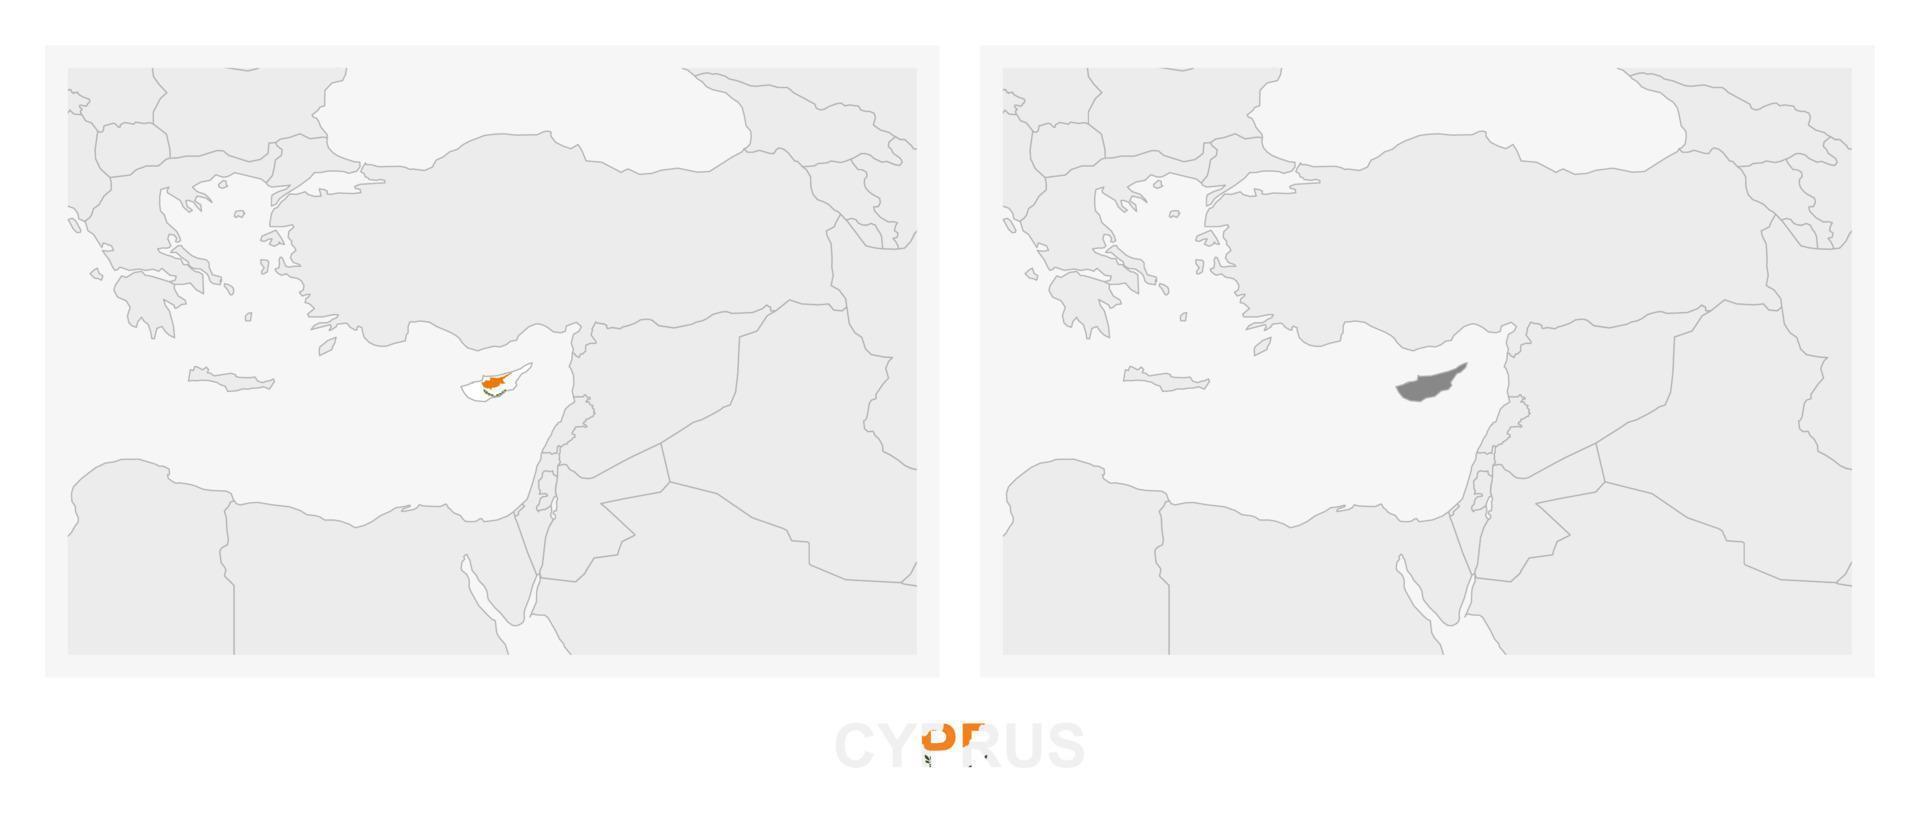 Two versions of the map of Cyprus, with the flag of Cyprus and highlighted in dark grey. vector